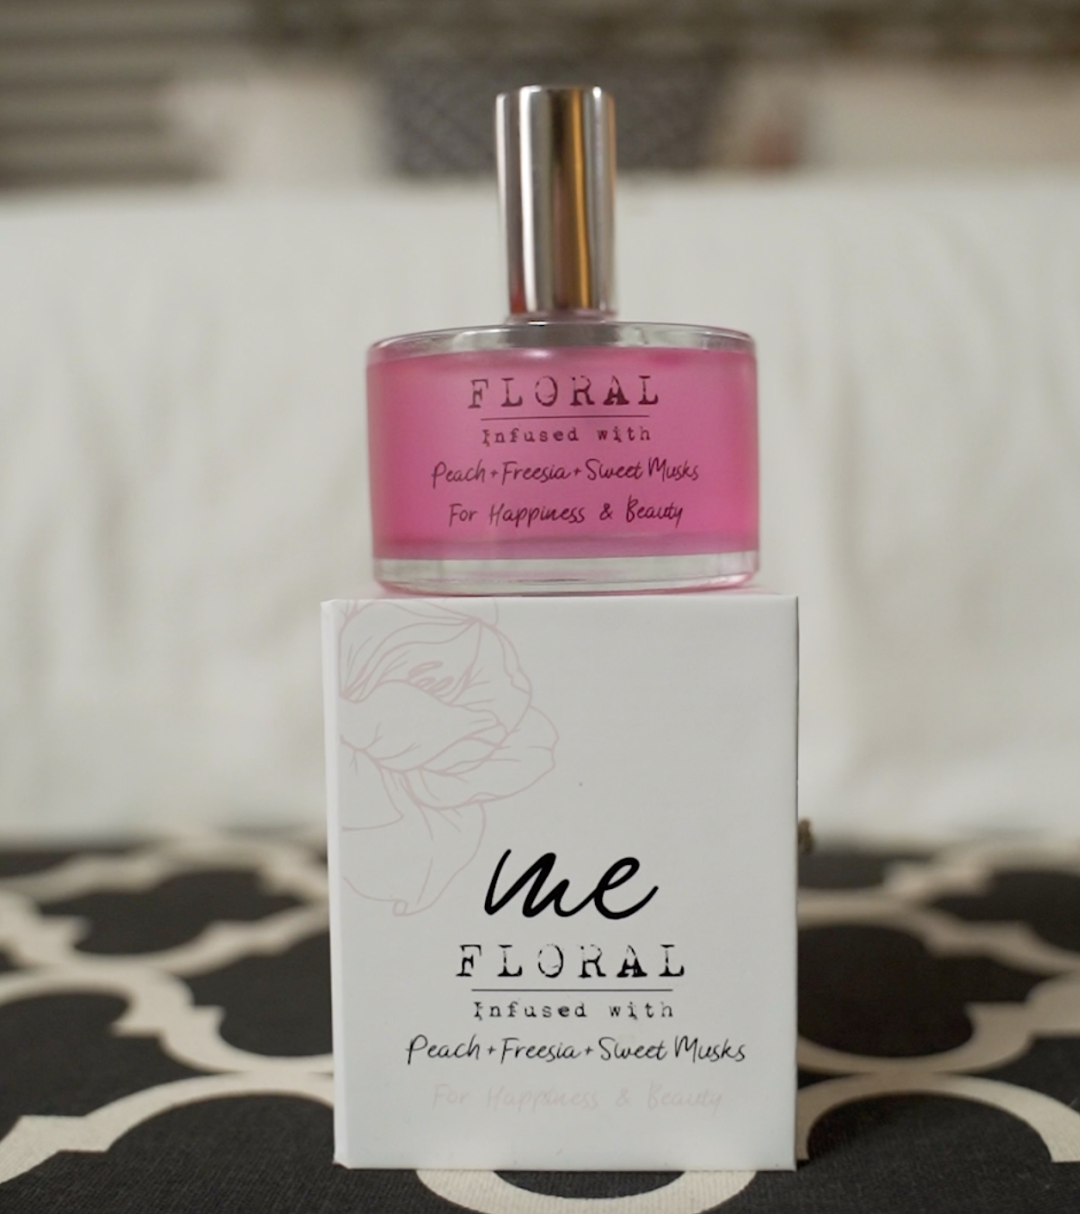 A bottle of Floral perfume.